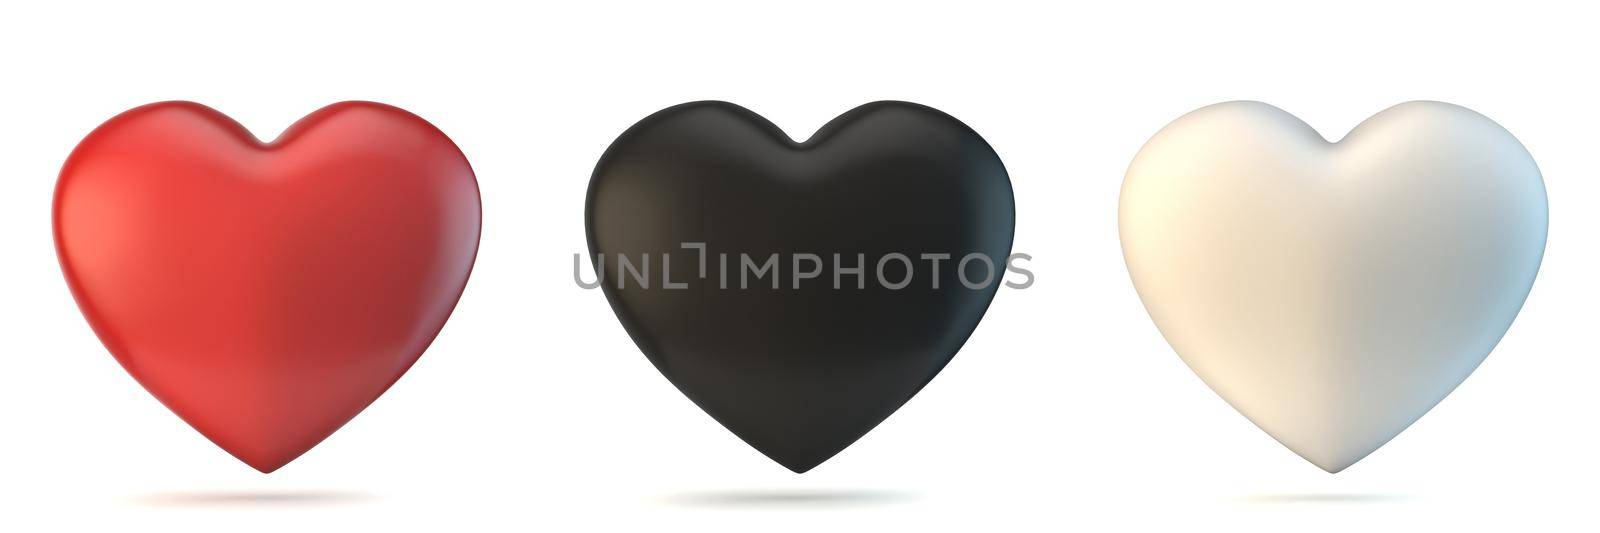 Three hearts 3D rendering illustration isolated on white background